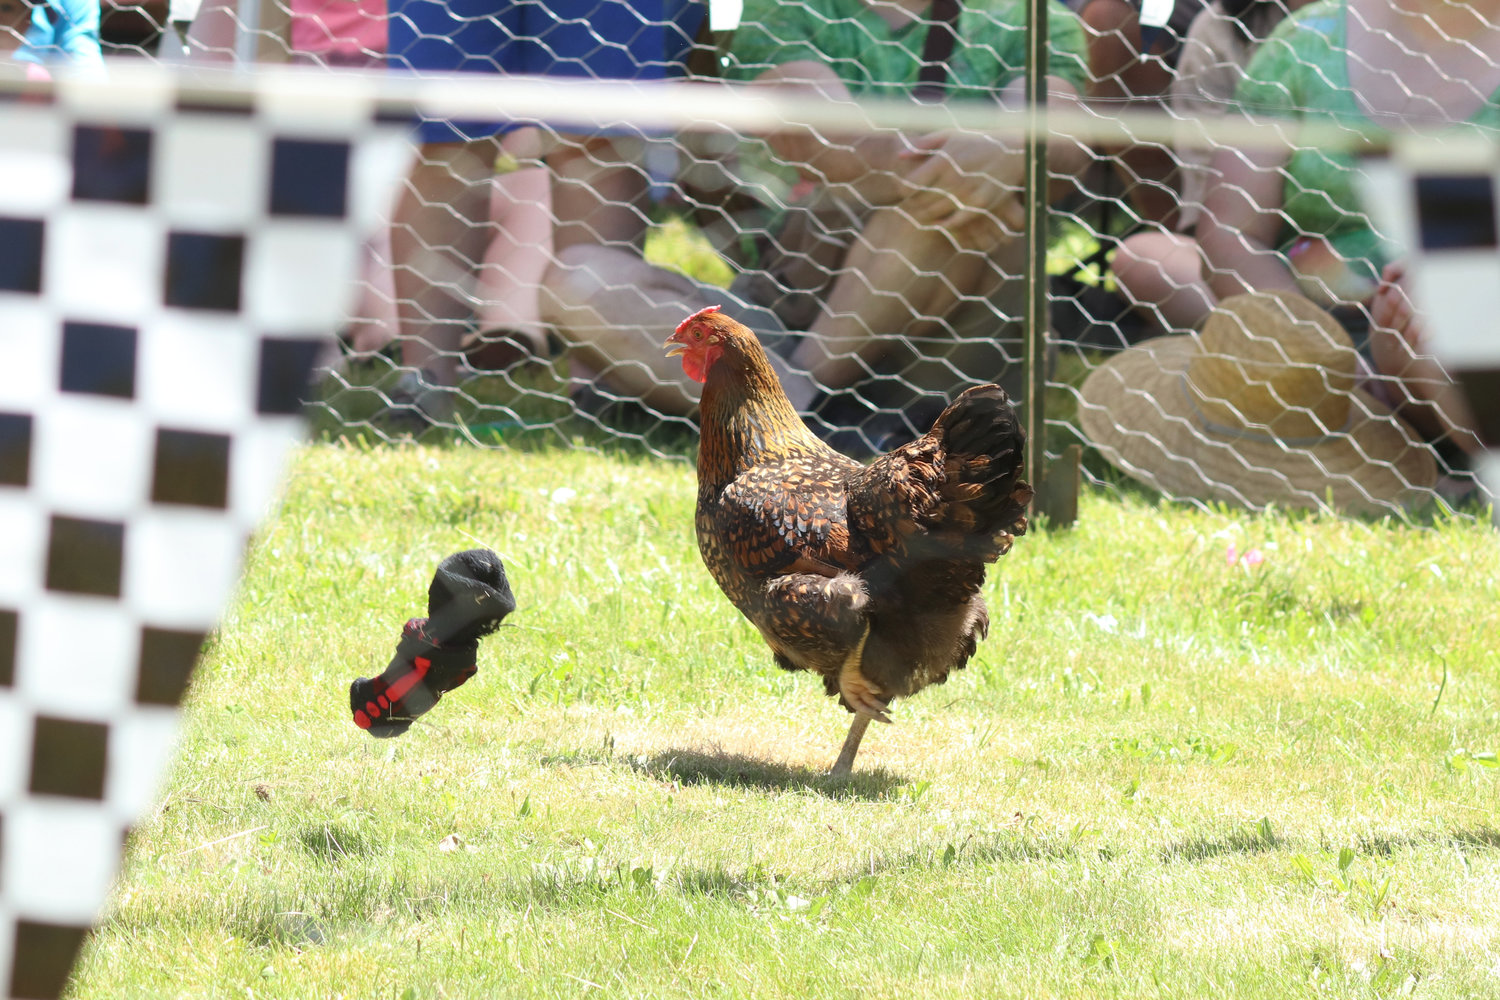 A chicken dodges a thrown pair of socks at Independence Valley Community Hall’s 42nd Annual Chicken Races in Rochester on Sunday. Judges timed how quickly contestants, with the help of soft thrown items like socks and hats, could get their chicken to run out of the circle.